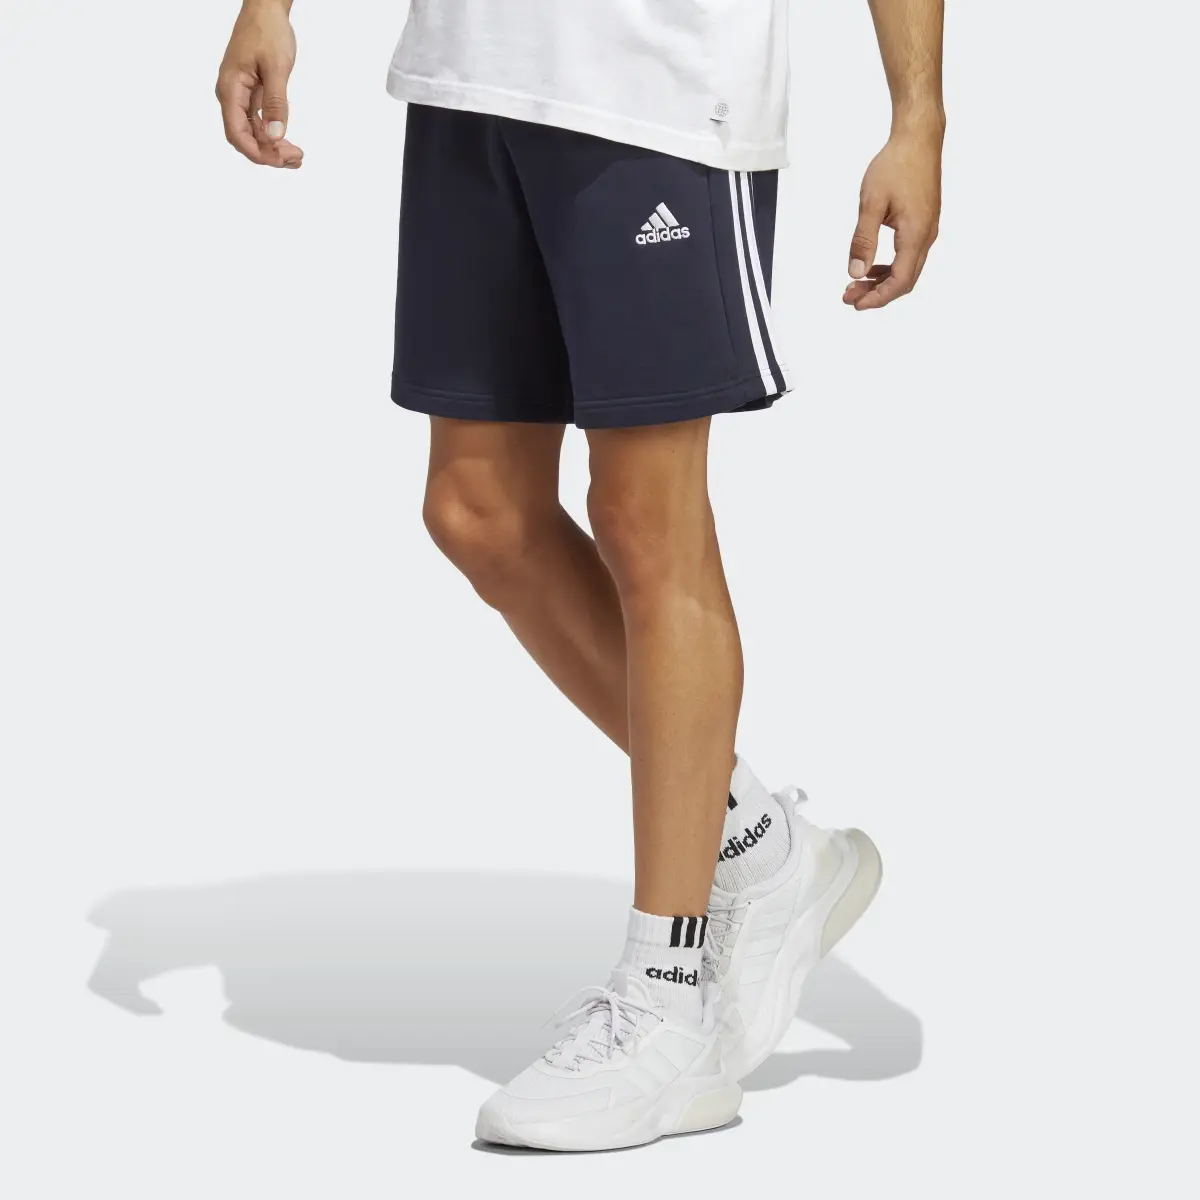 Adidas Essentials French Terry 3-Stripes Shorts. 1